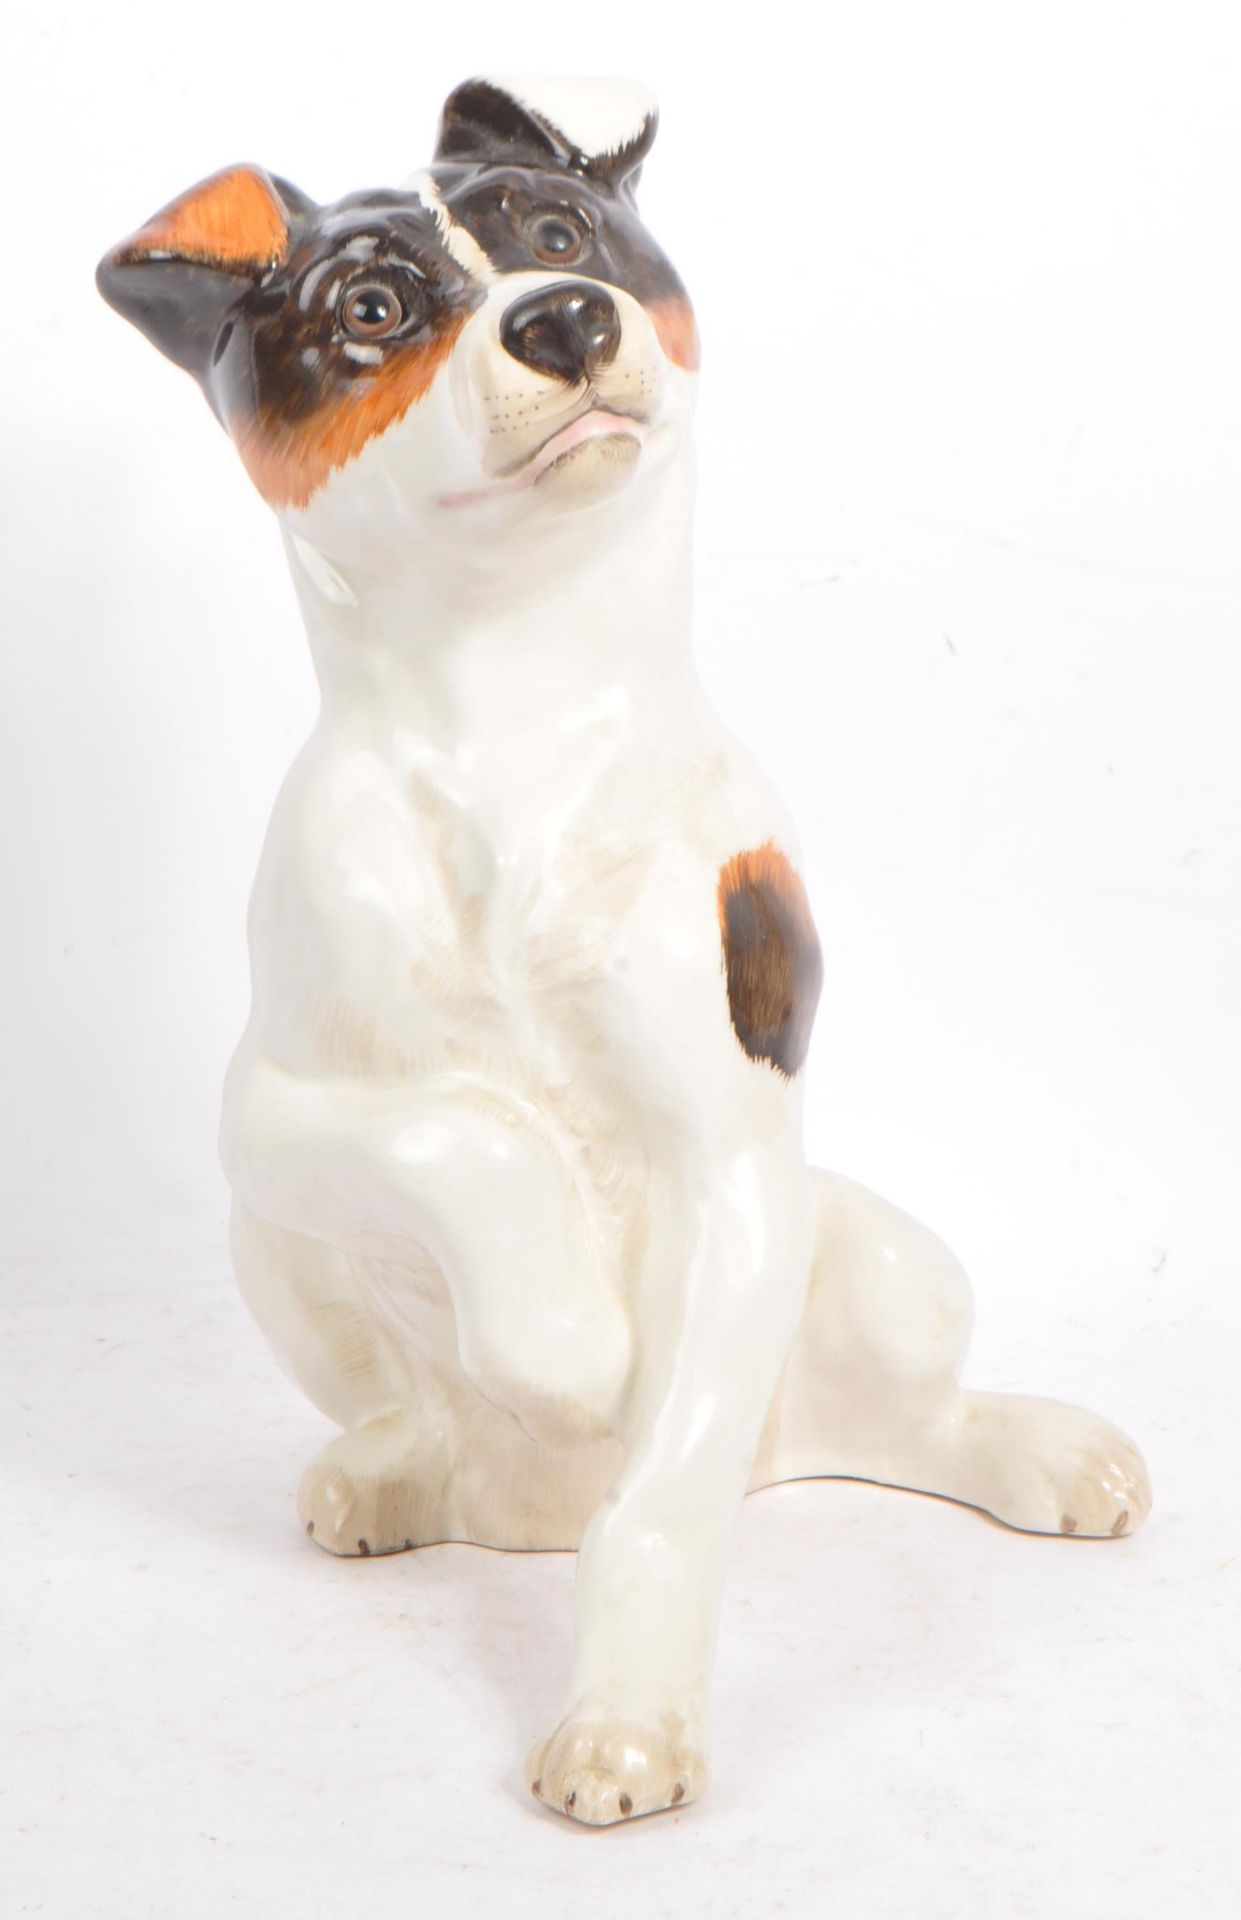 JUST CATS & FRIENDS - CERAMIC MODEL OF A JACK RUSSELL DOG